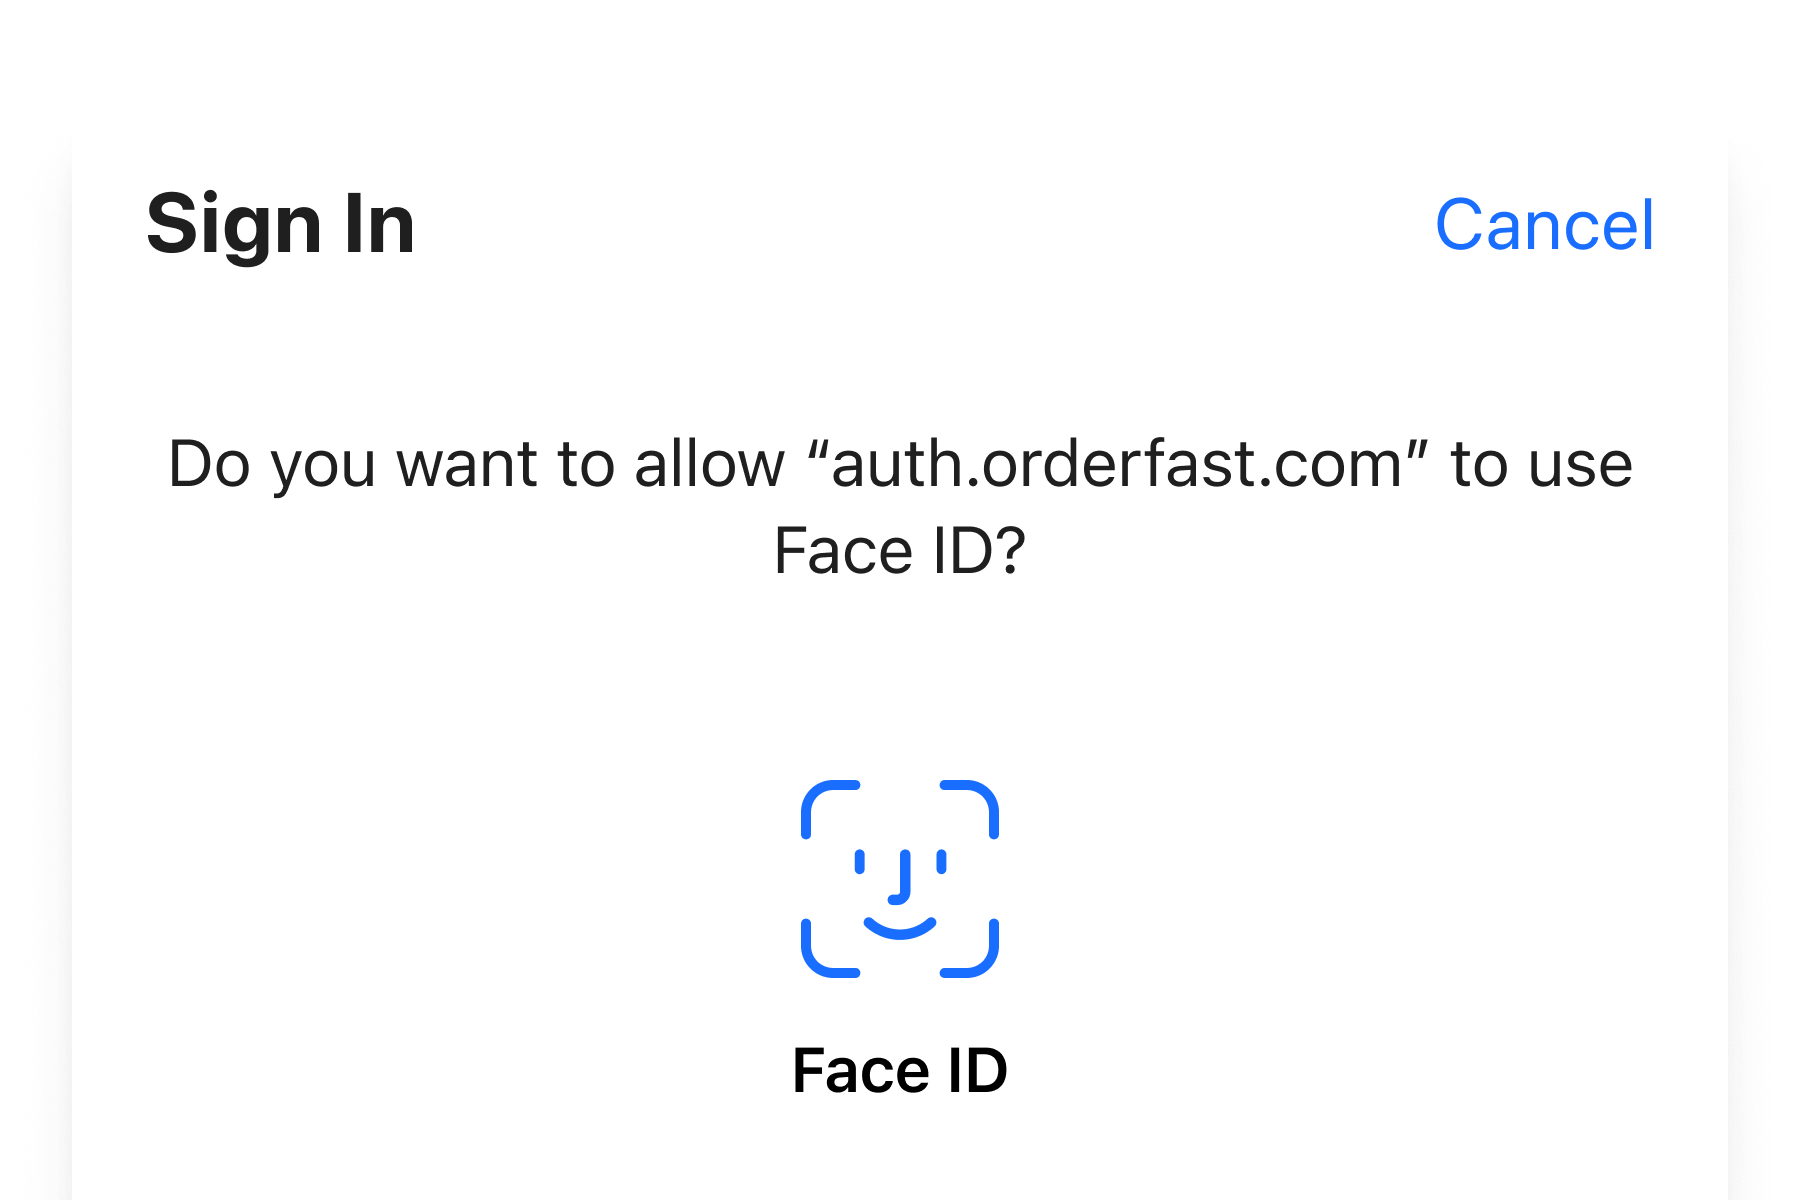 Signing in with Face Id on OrderFast.